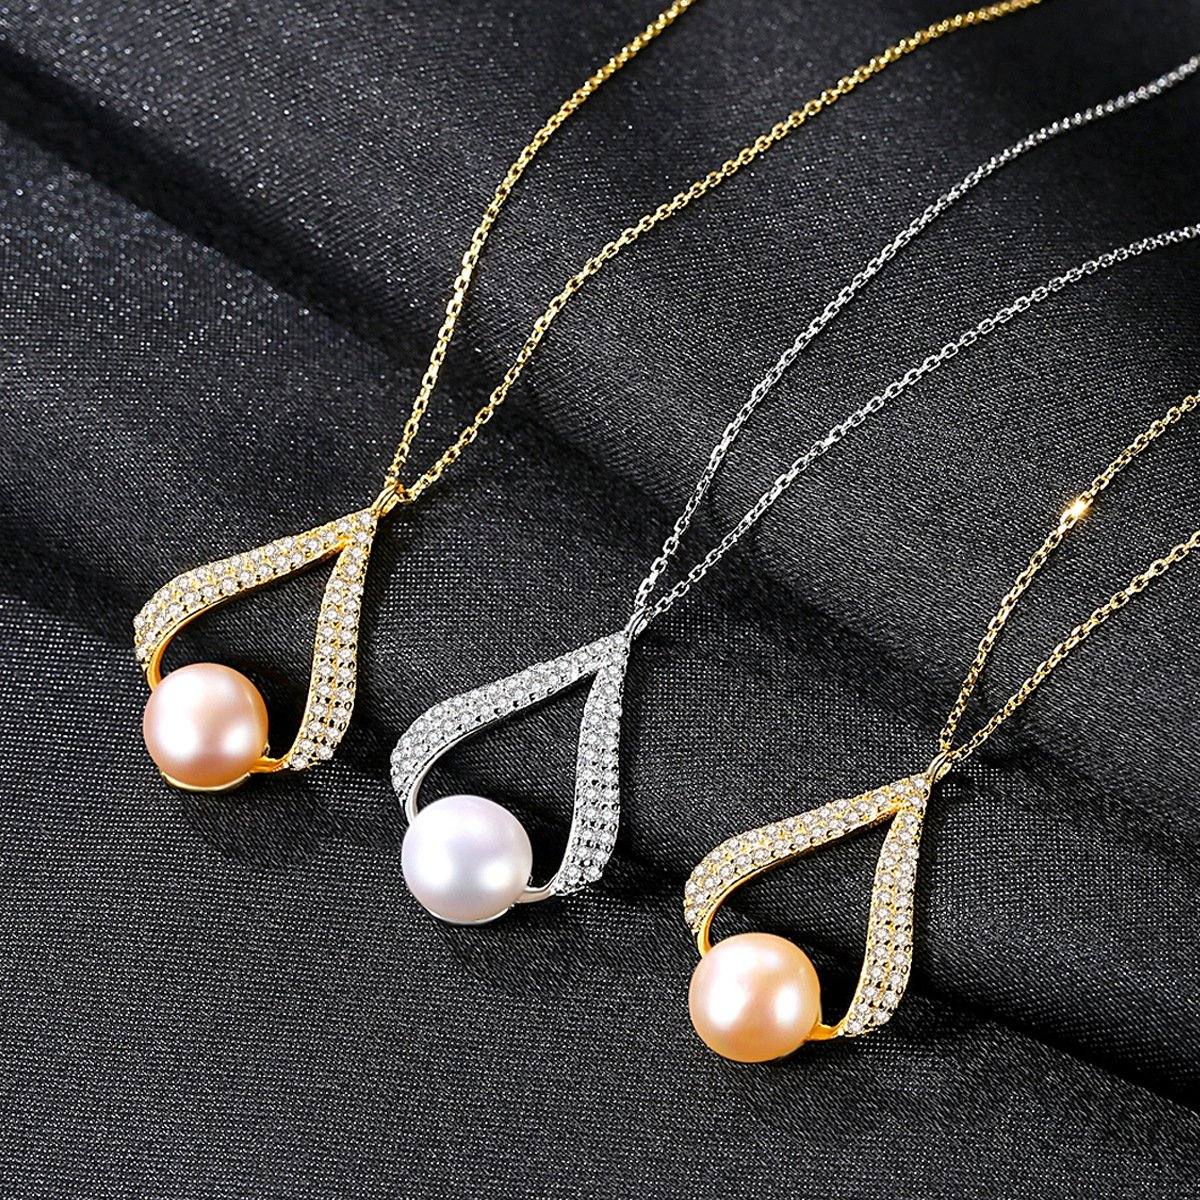 Antique Pearl Necklace - HERS